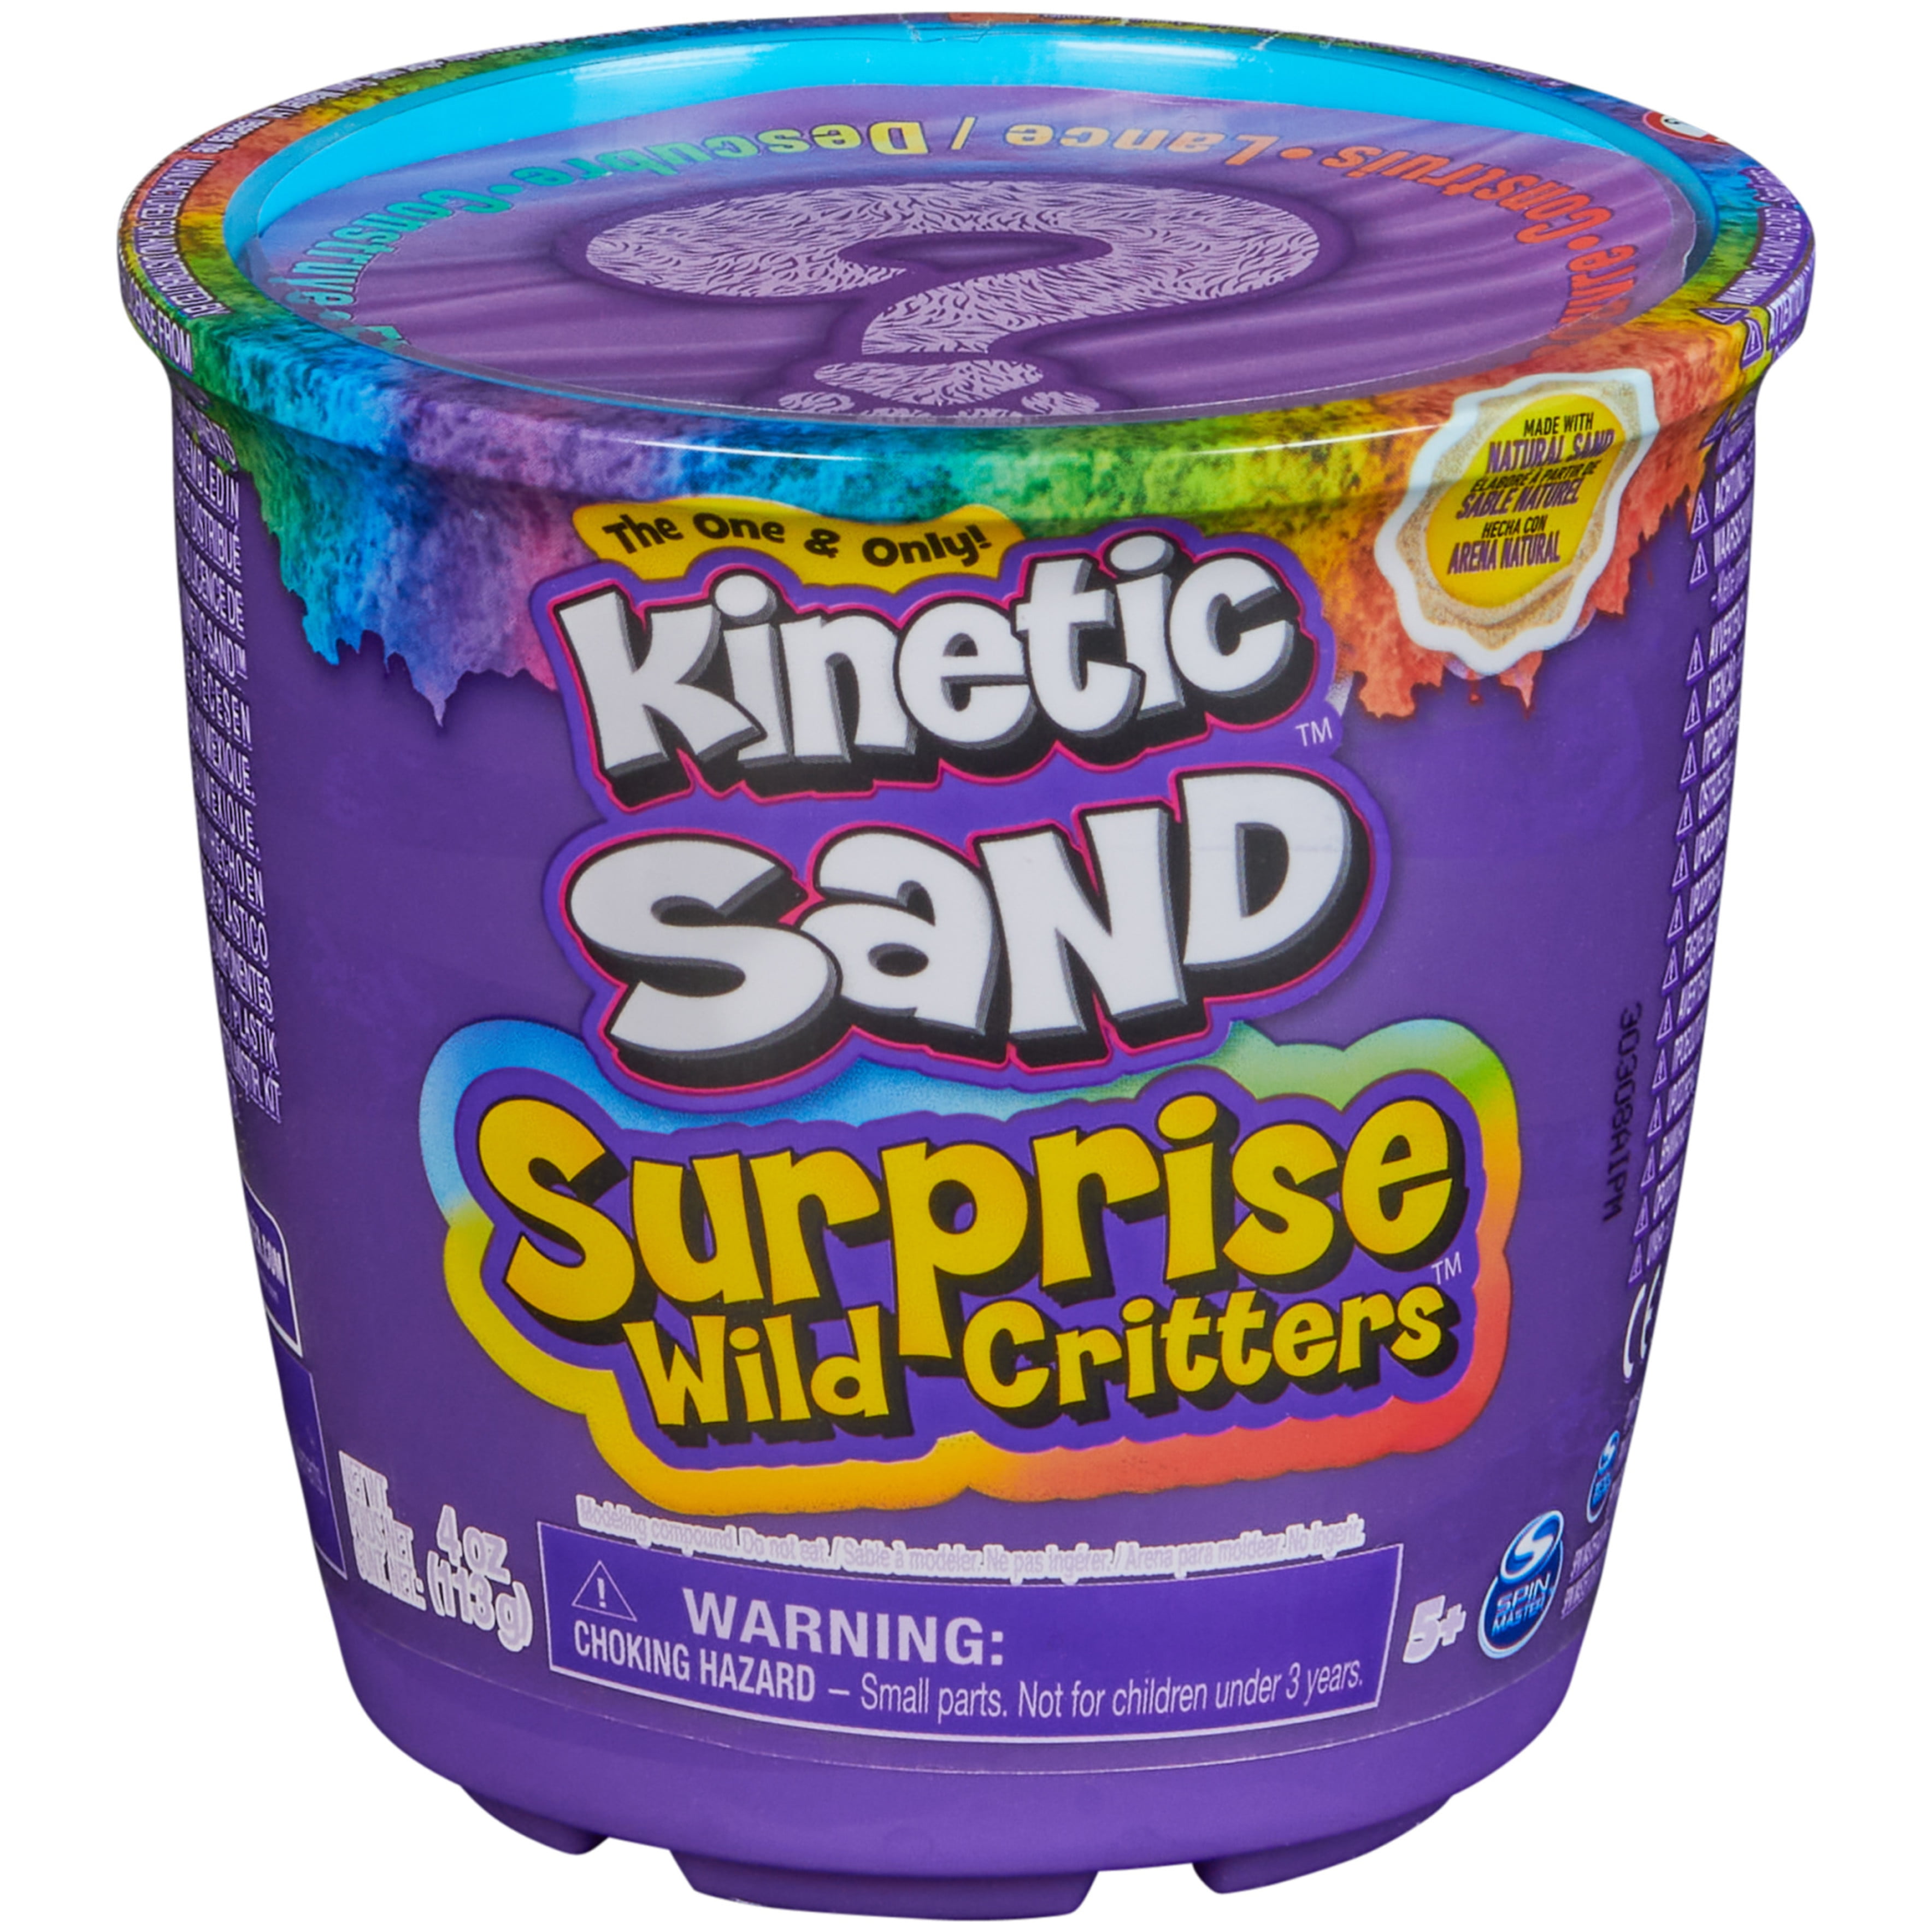 Kinetic Sand Surprise Wild Critters Play Set with Storage $4.97